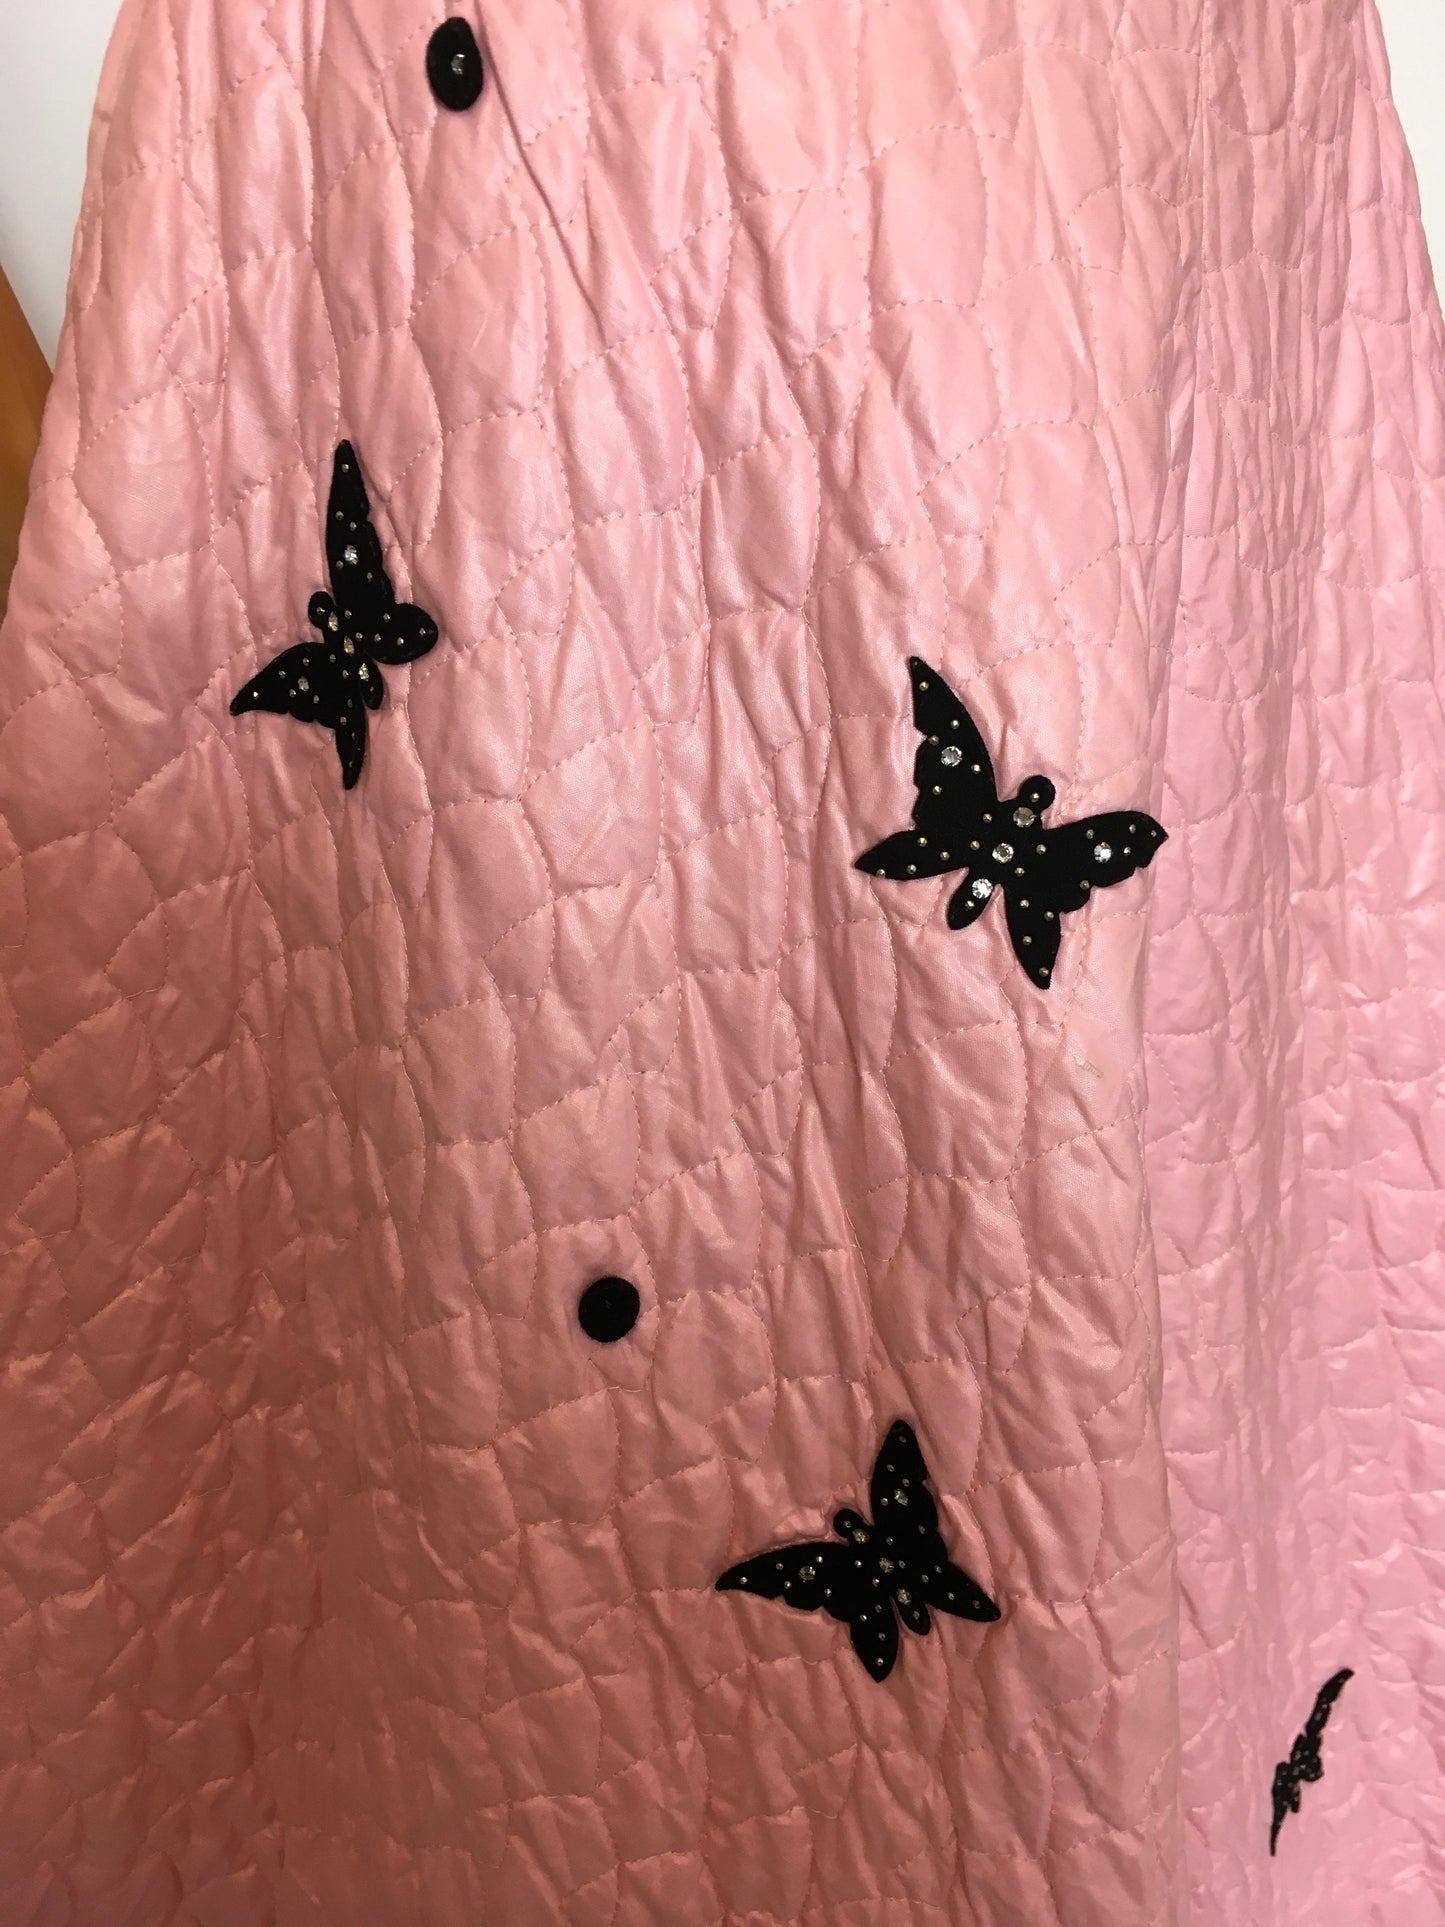 Original Darling 1950's quilted full circle skirt - In a Cute pink featuring black embelished Butterflies